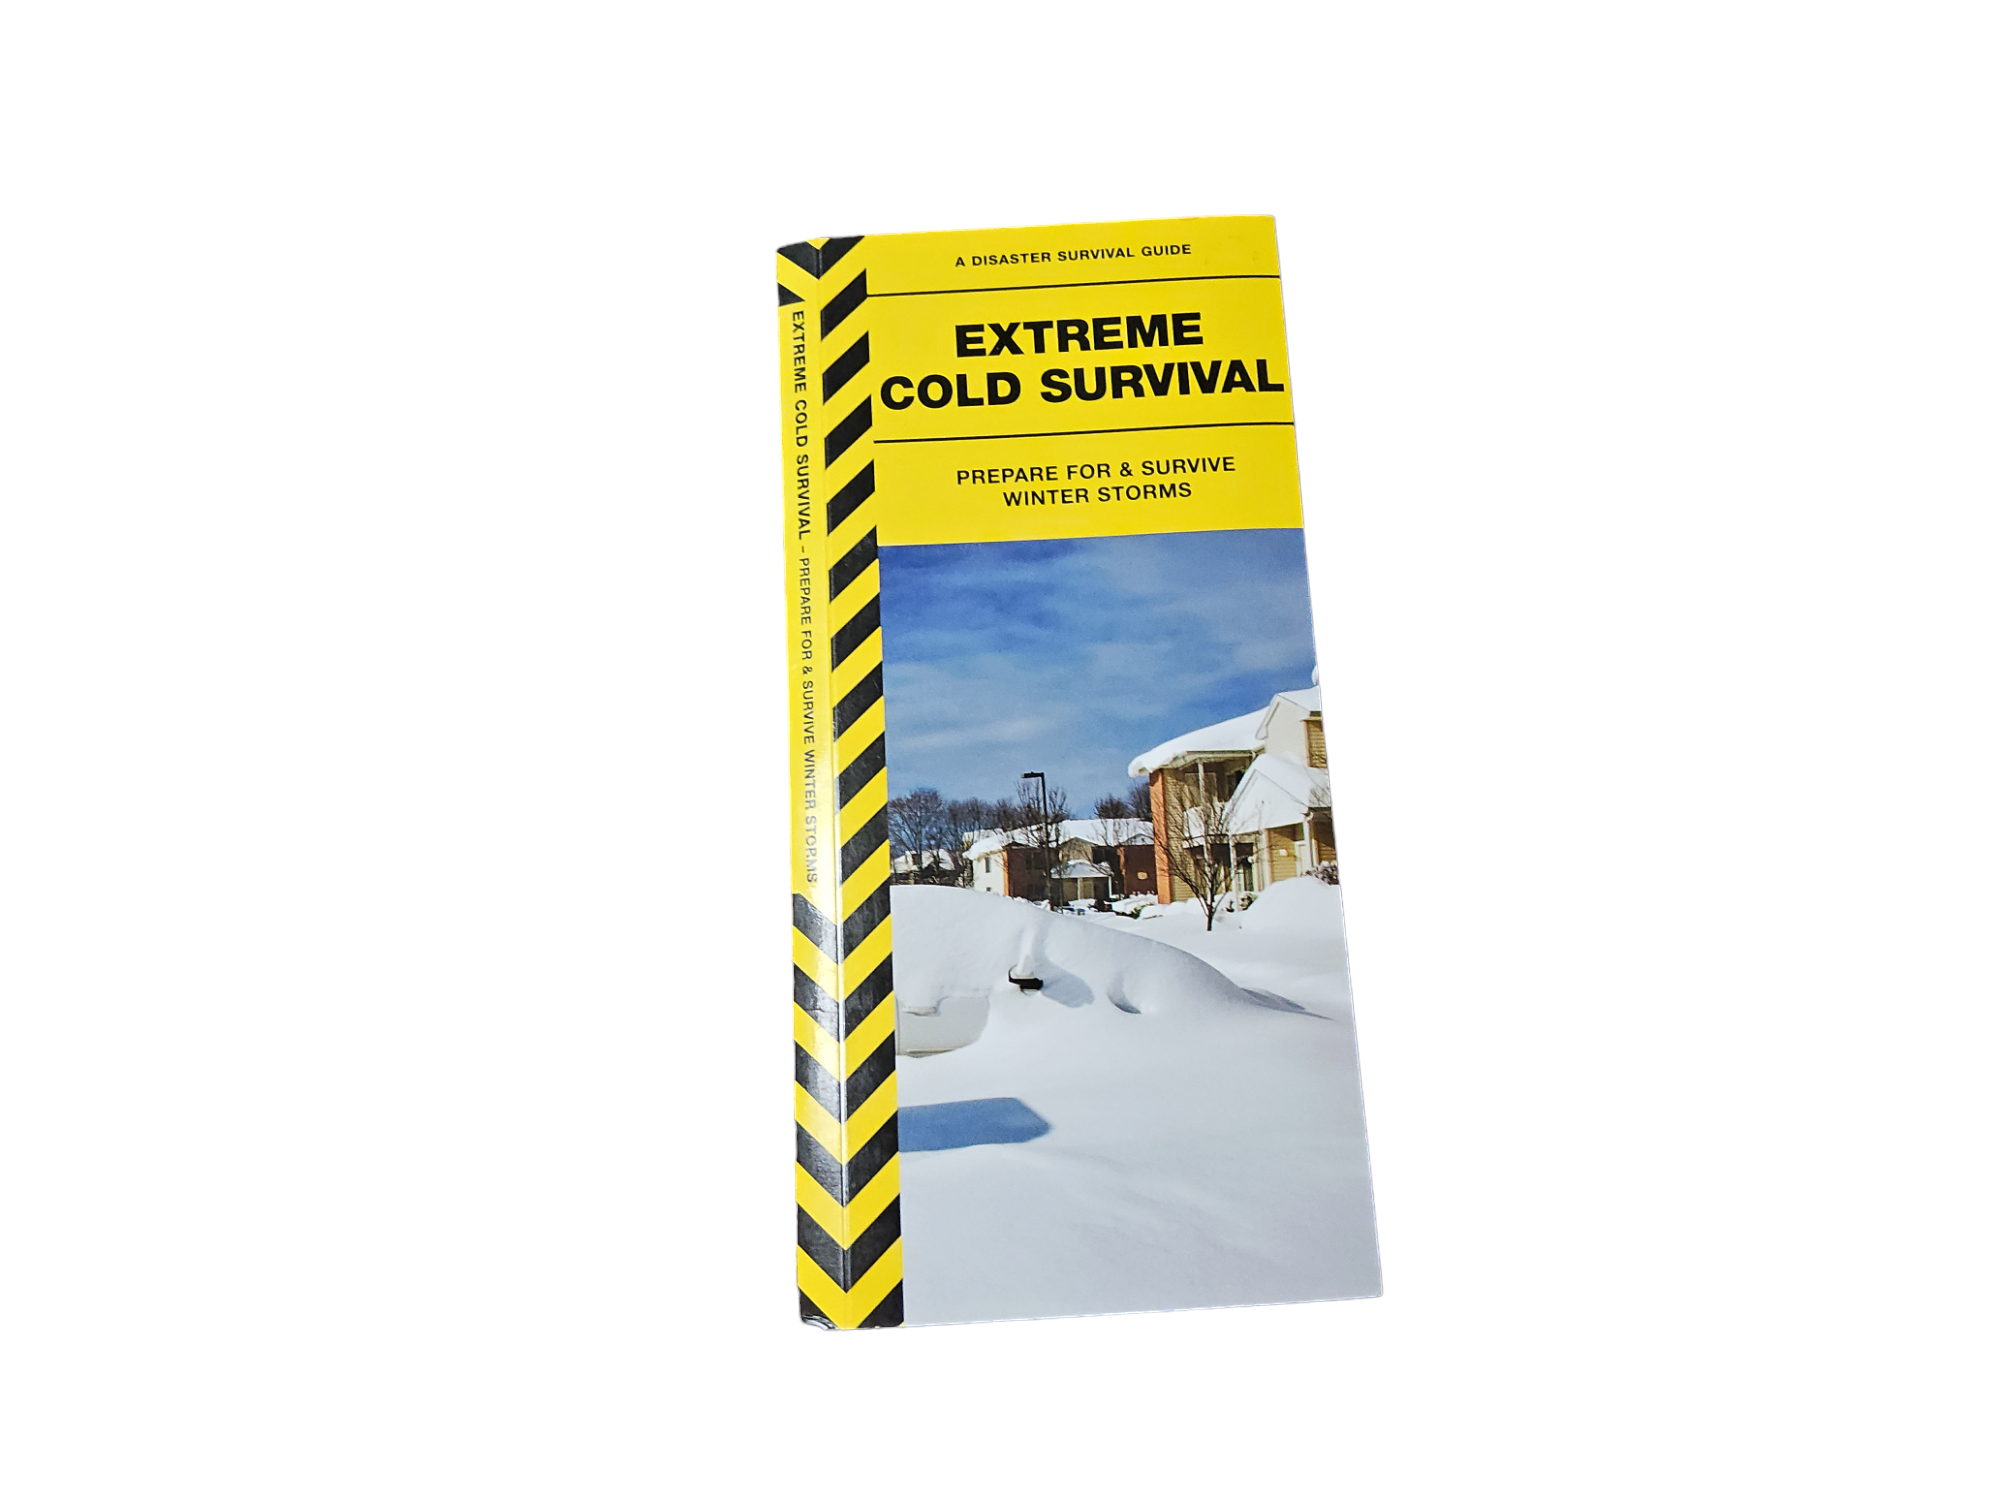 Extreme Cold Survival Prepare for and Survive Winter Storms Guide